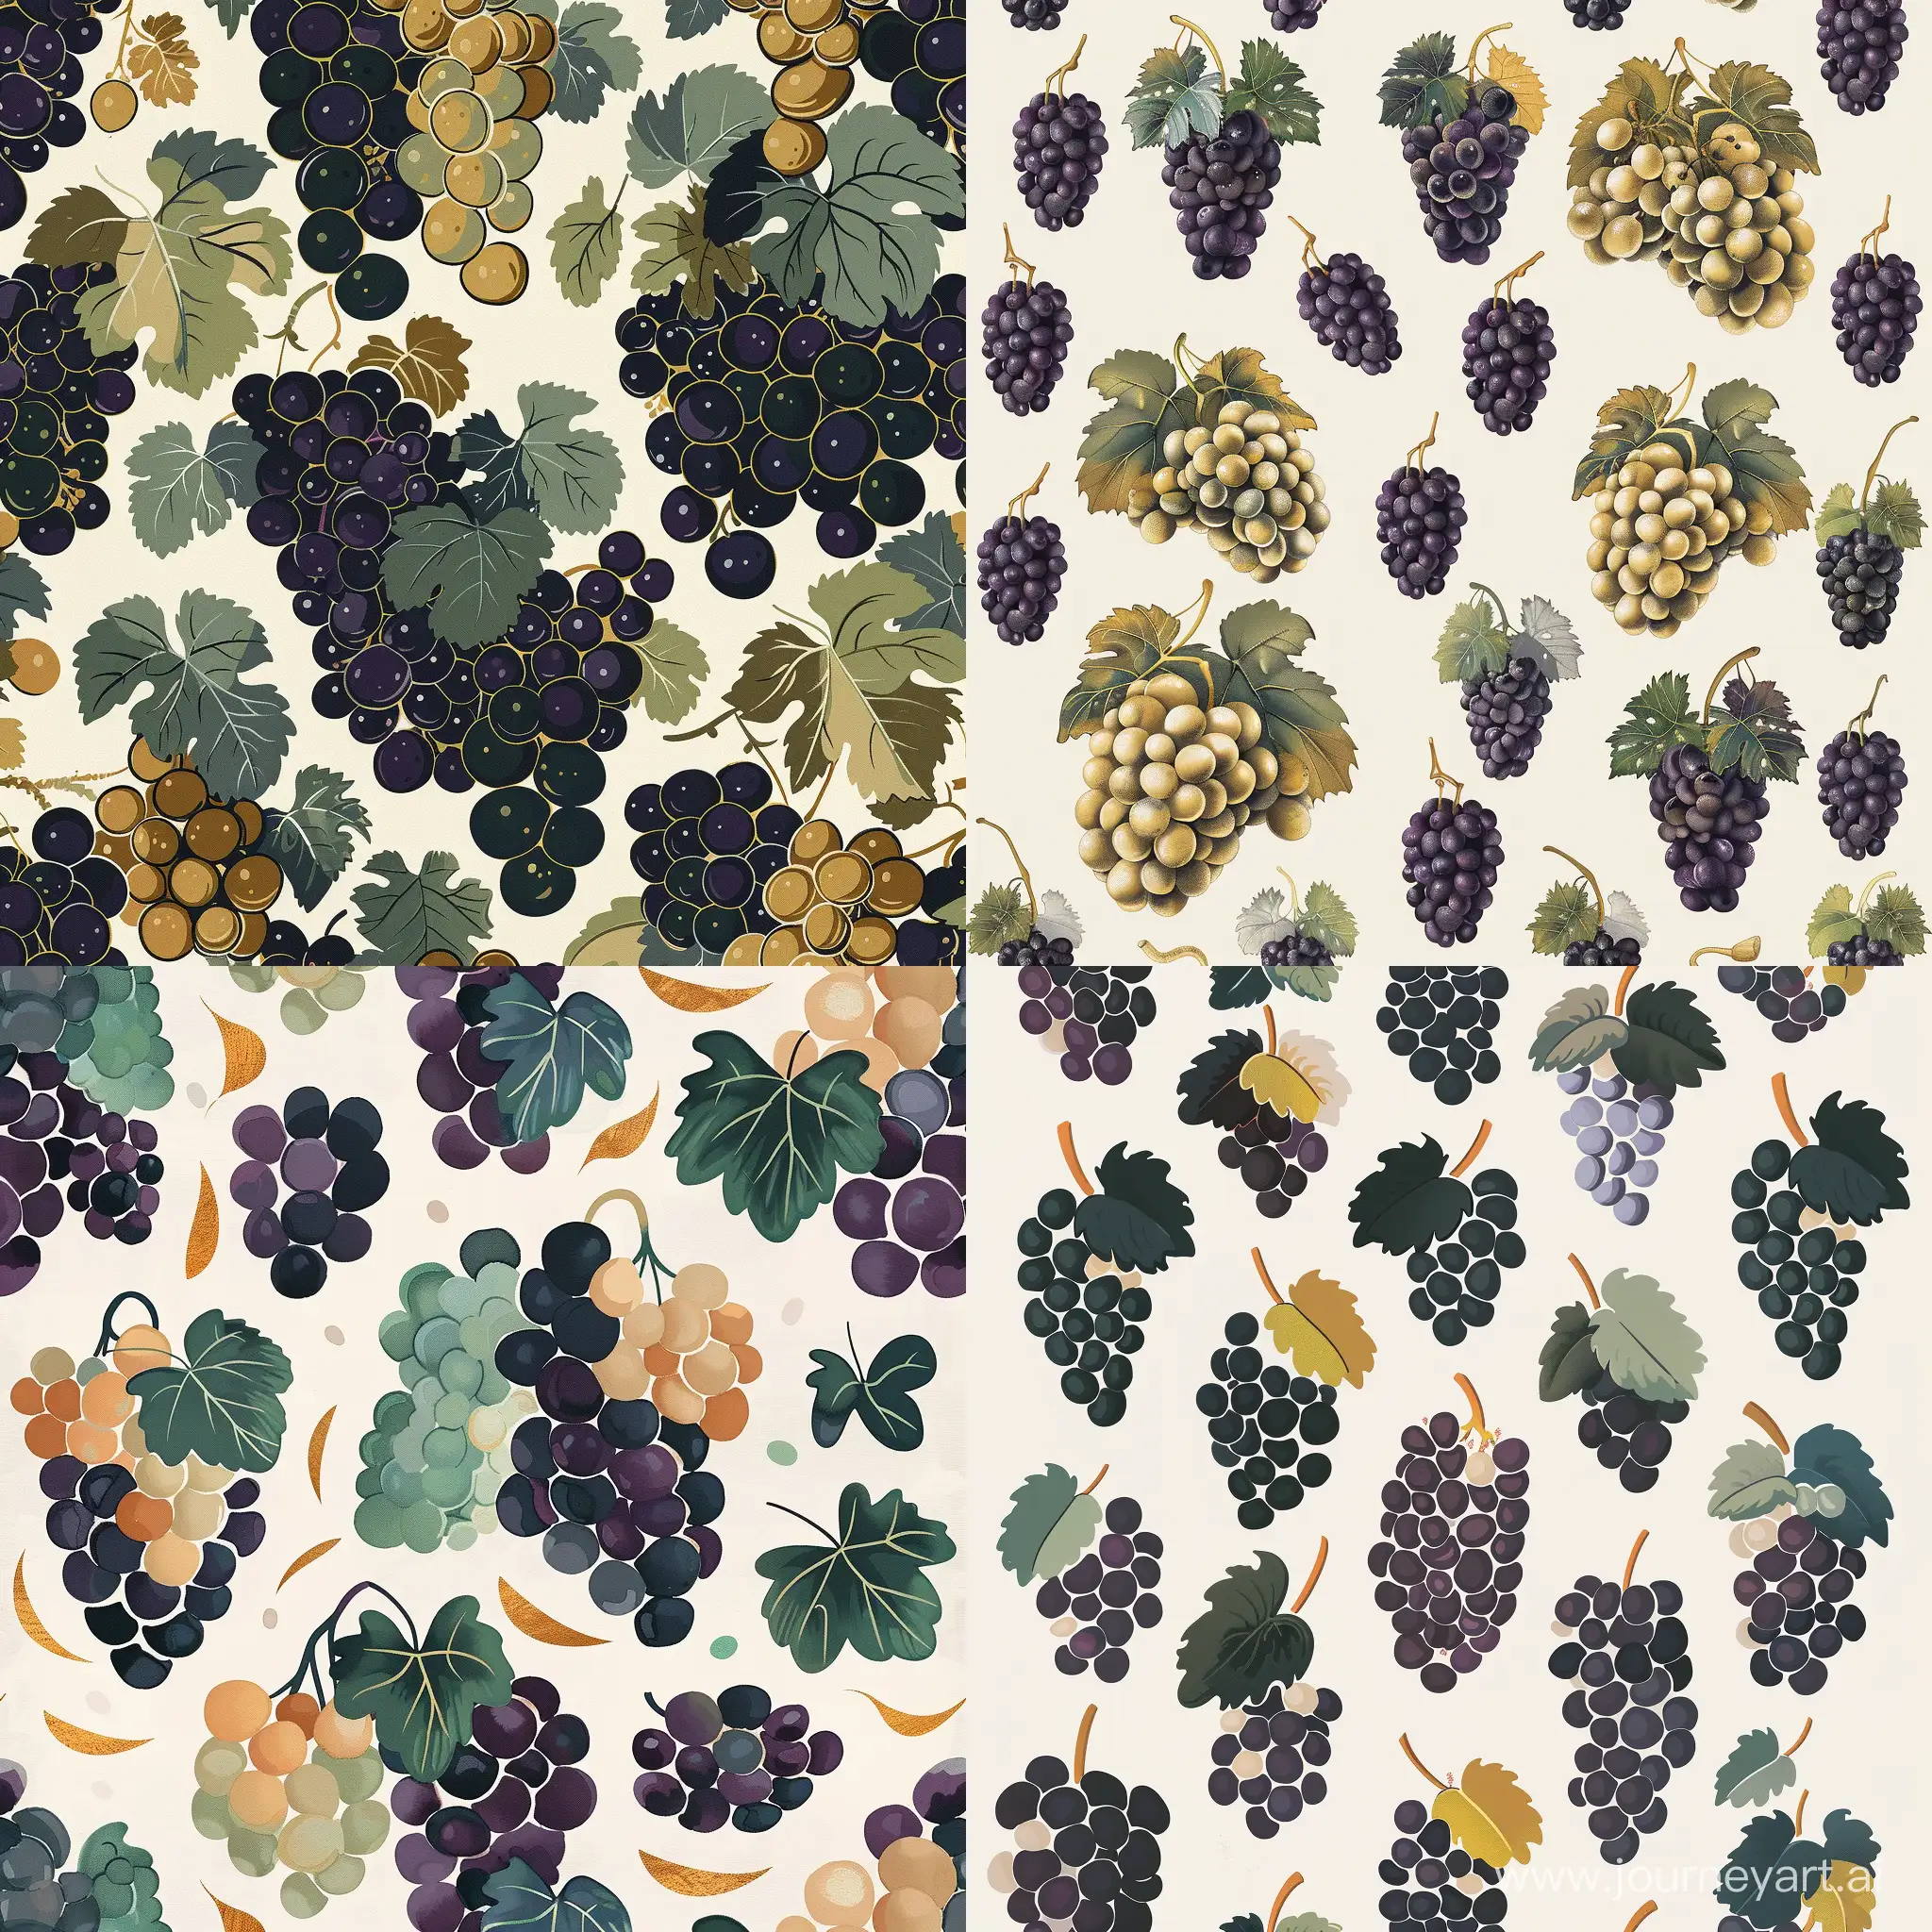 Lush-Grape-Clusters-Pattern-in-Deep-Purple-and-Green